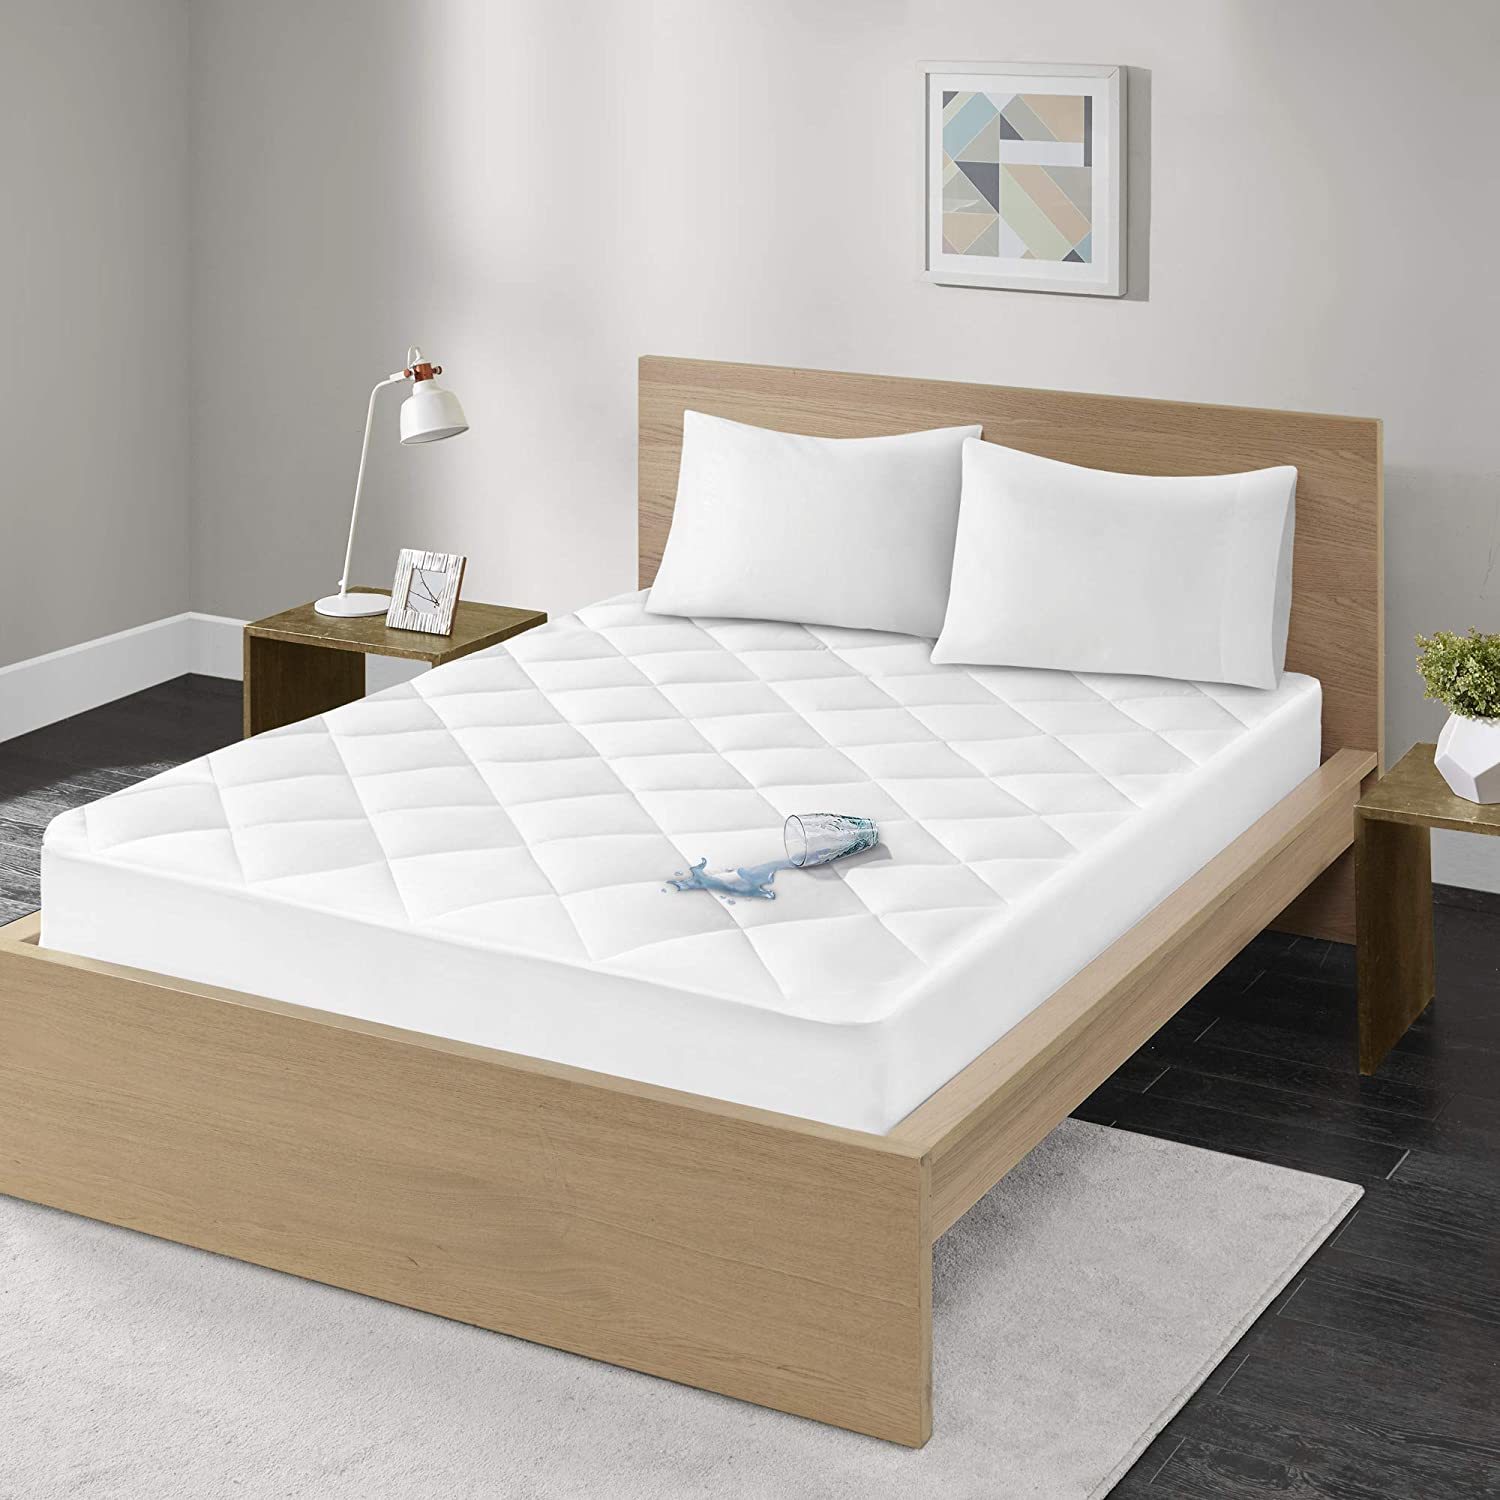 Madison Park Quiet Nights Mattress-Cover-Protector | 300 Thread Count, White - $43.99